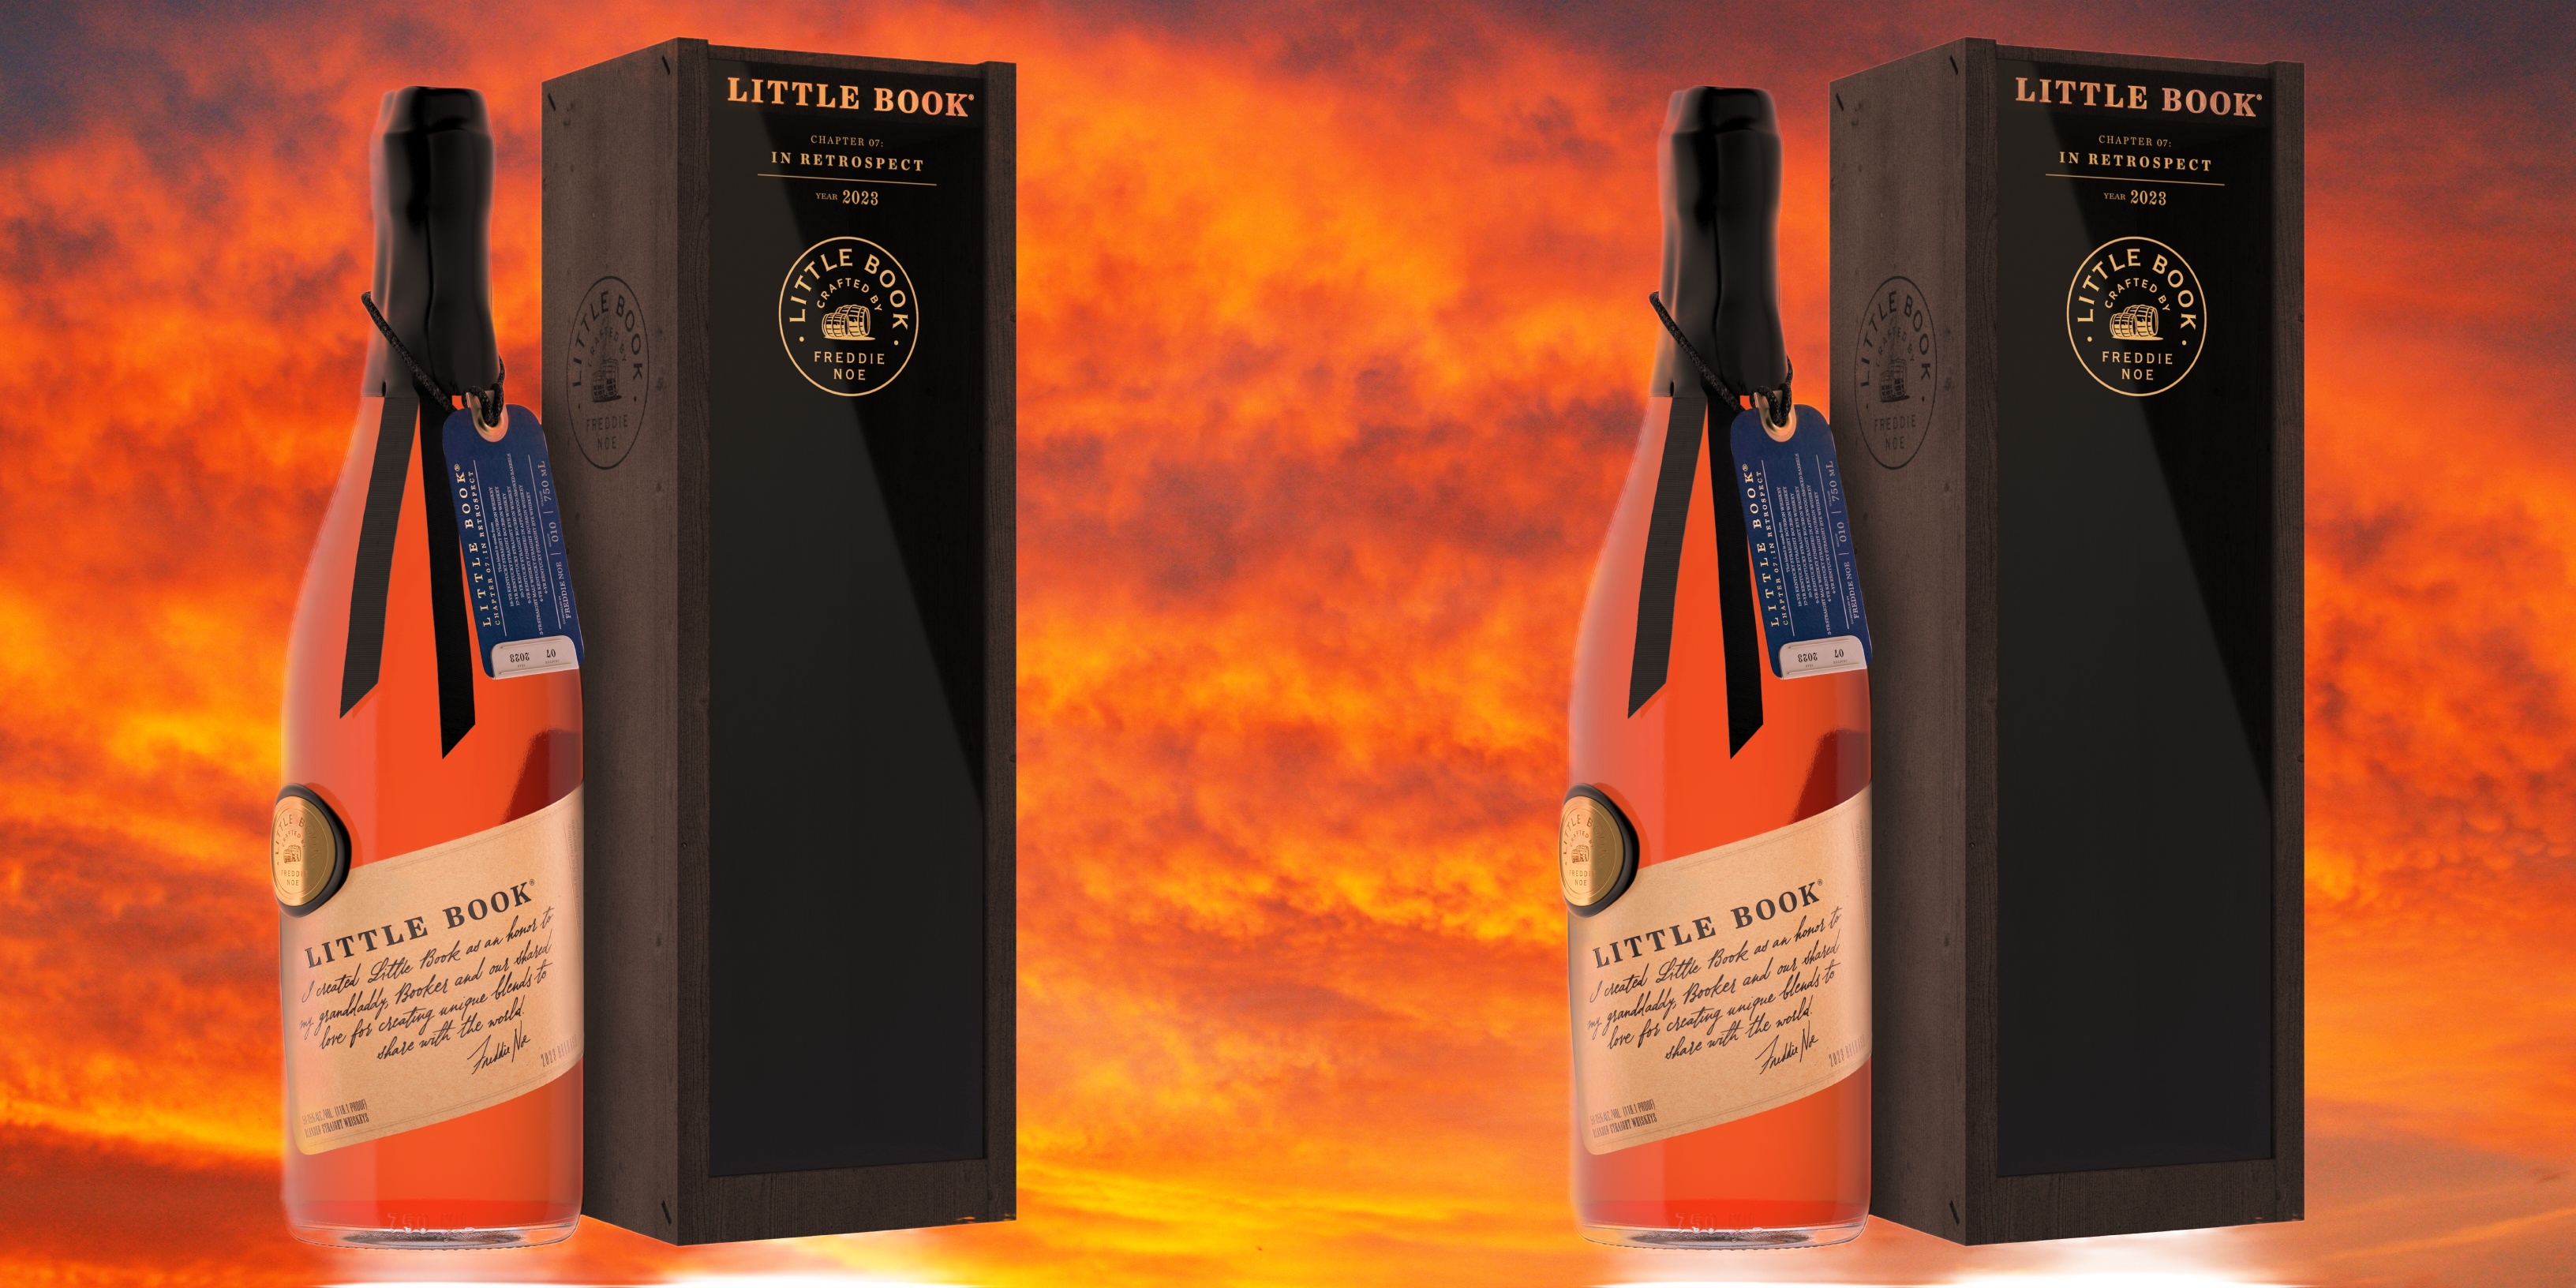 Little Book Chapter 7 In Retrospect whiskey blend details and bottle photo